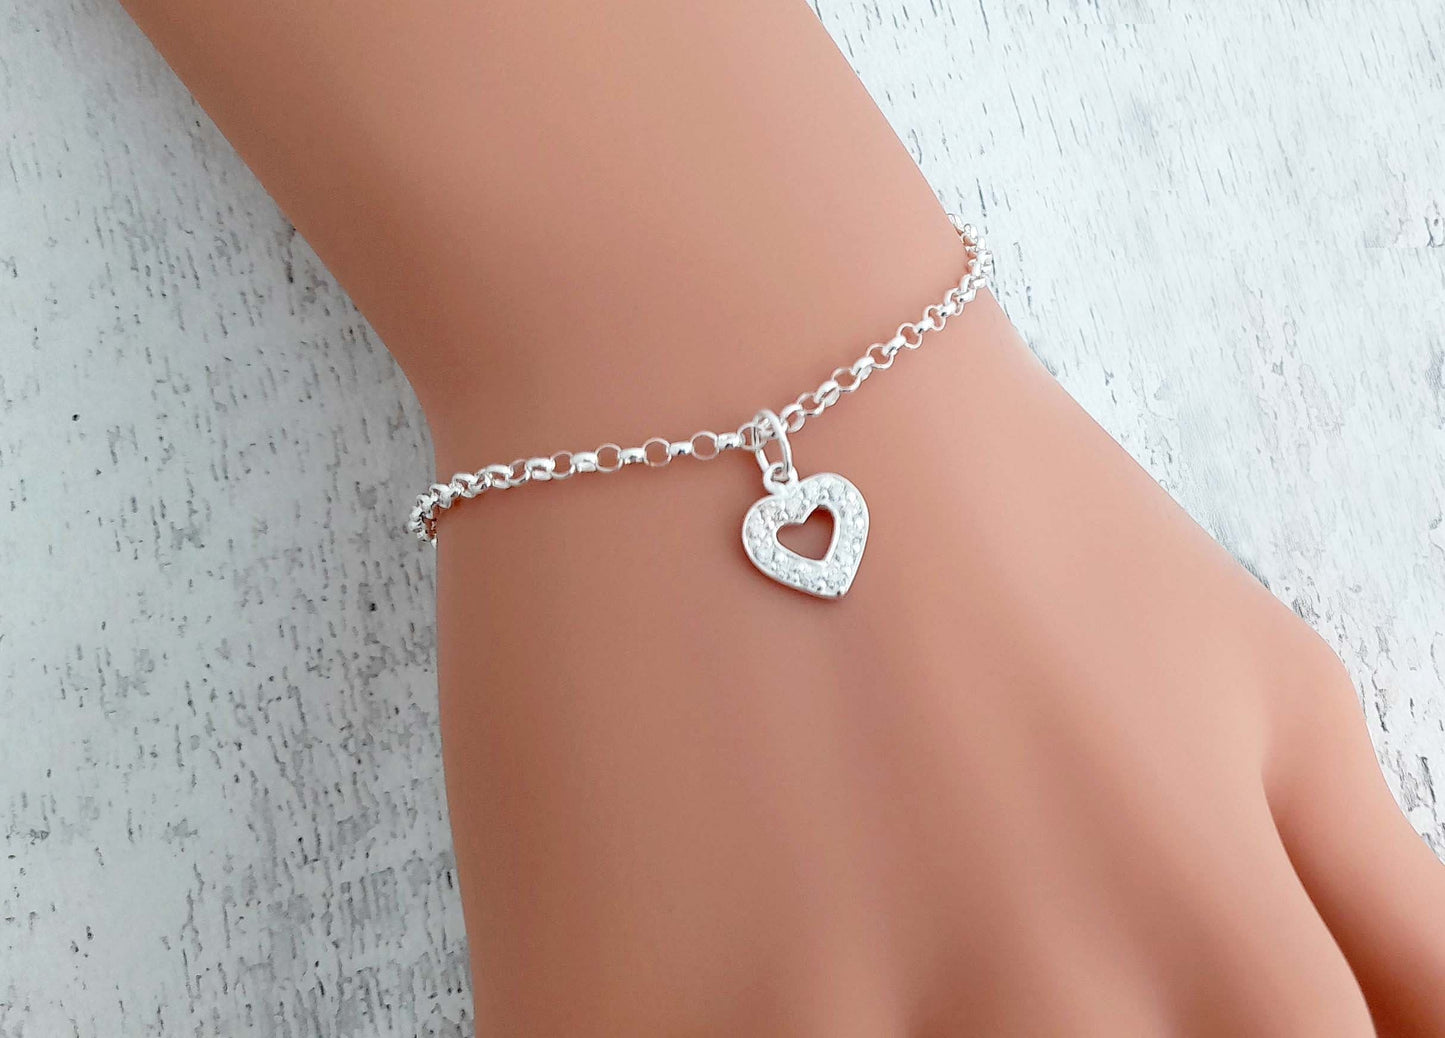 Maid of Honour Heart Bracelet with Cubic Zirconia in Sterling Silver 925, Personalised Gift